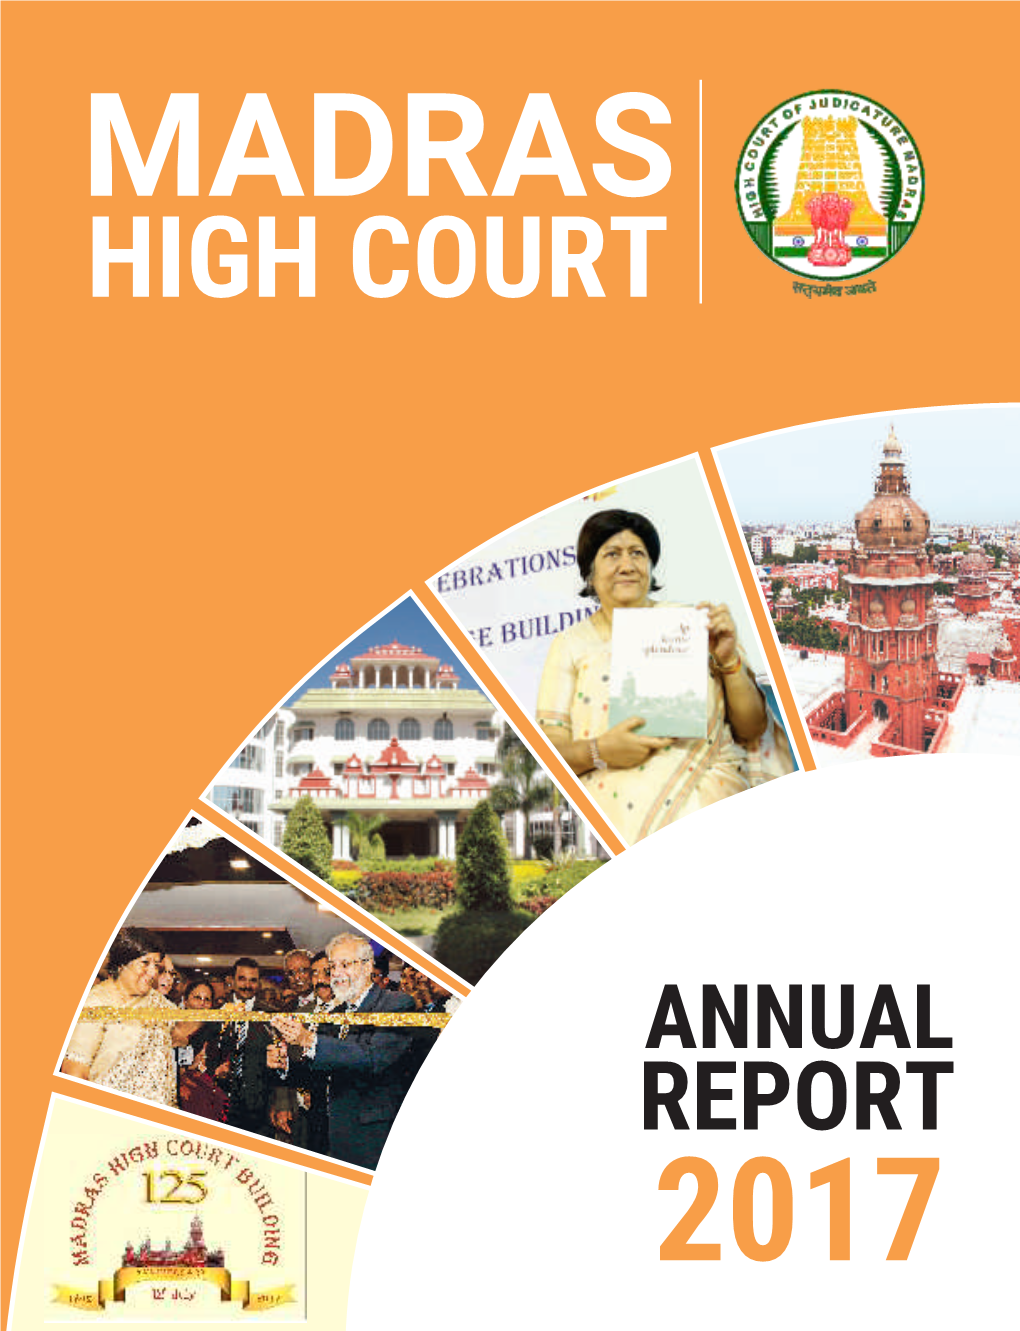 Madras High Court Annual Report for the Year 2017